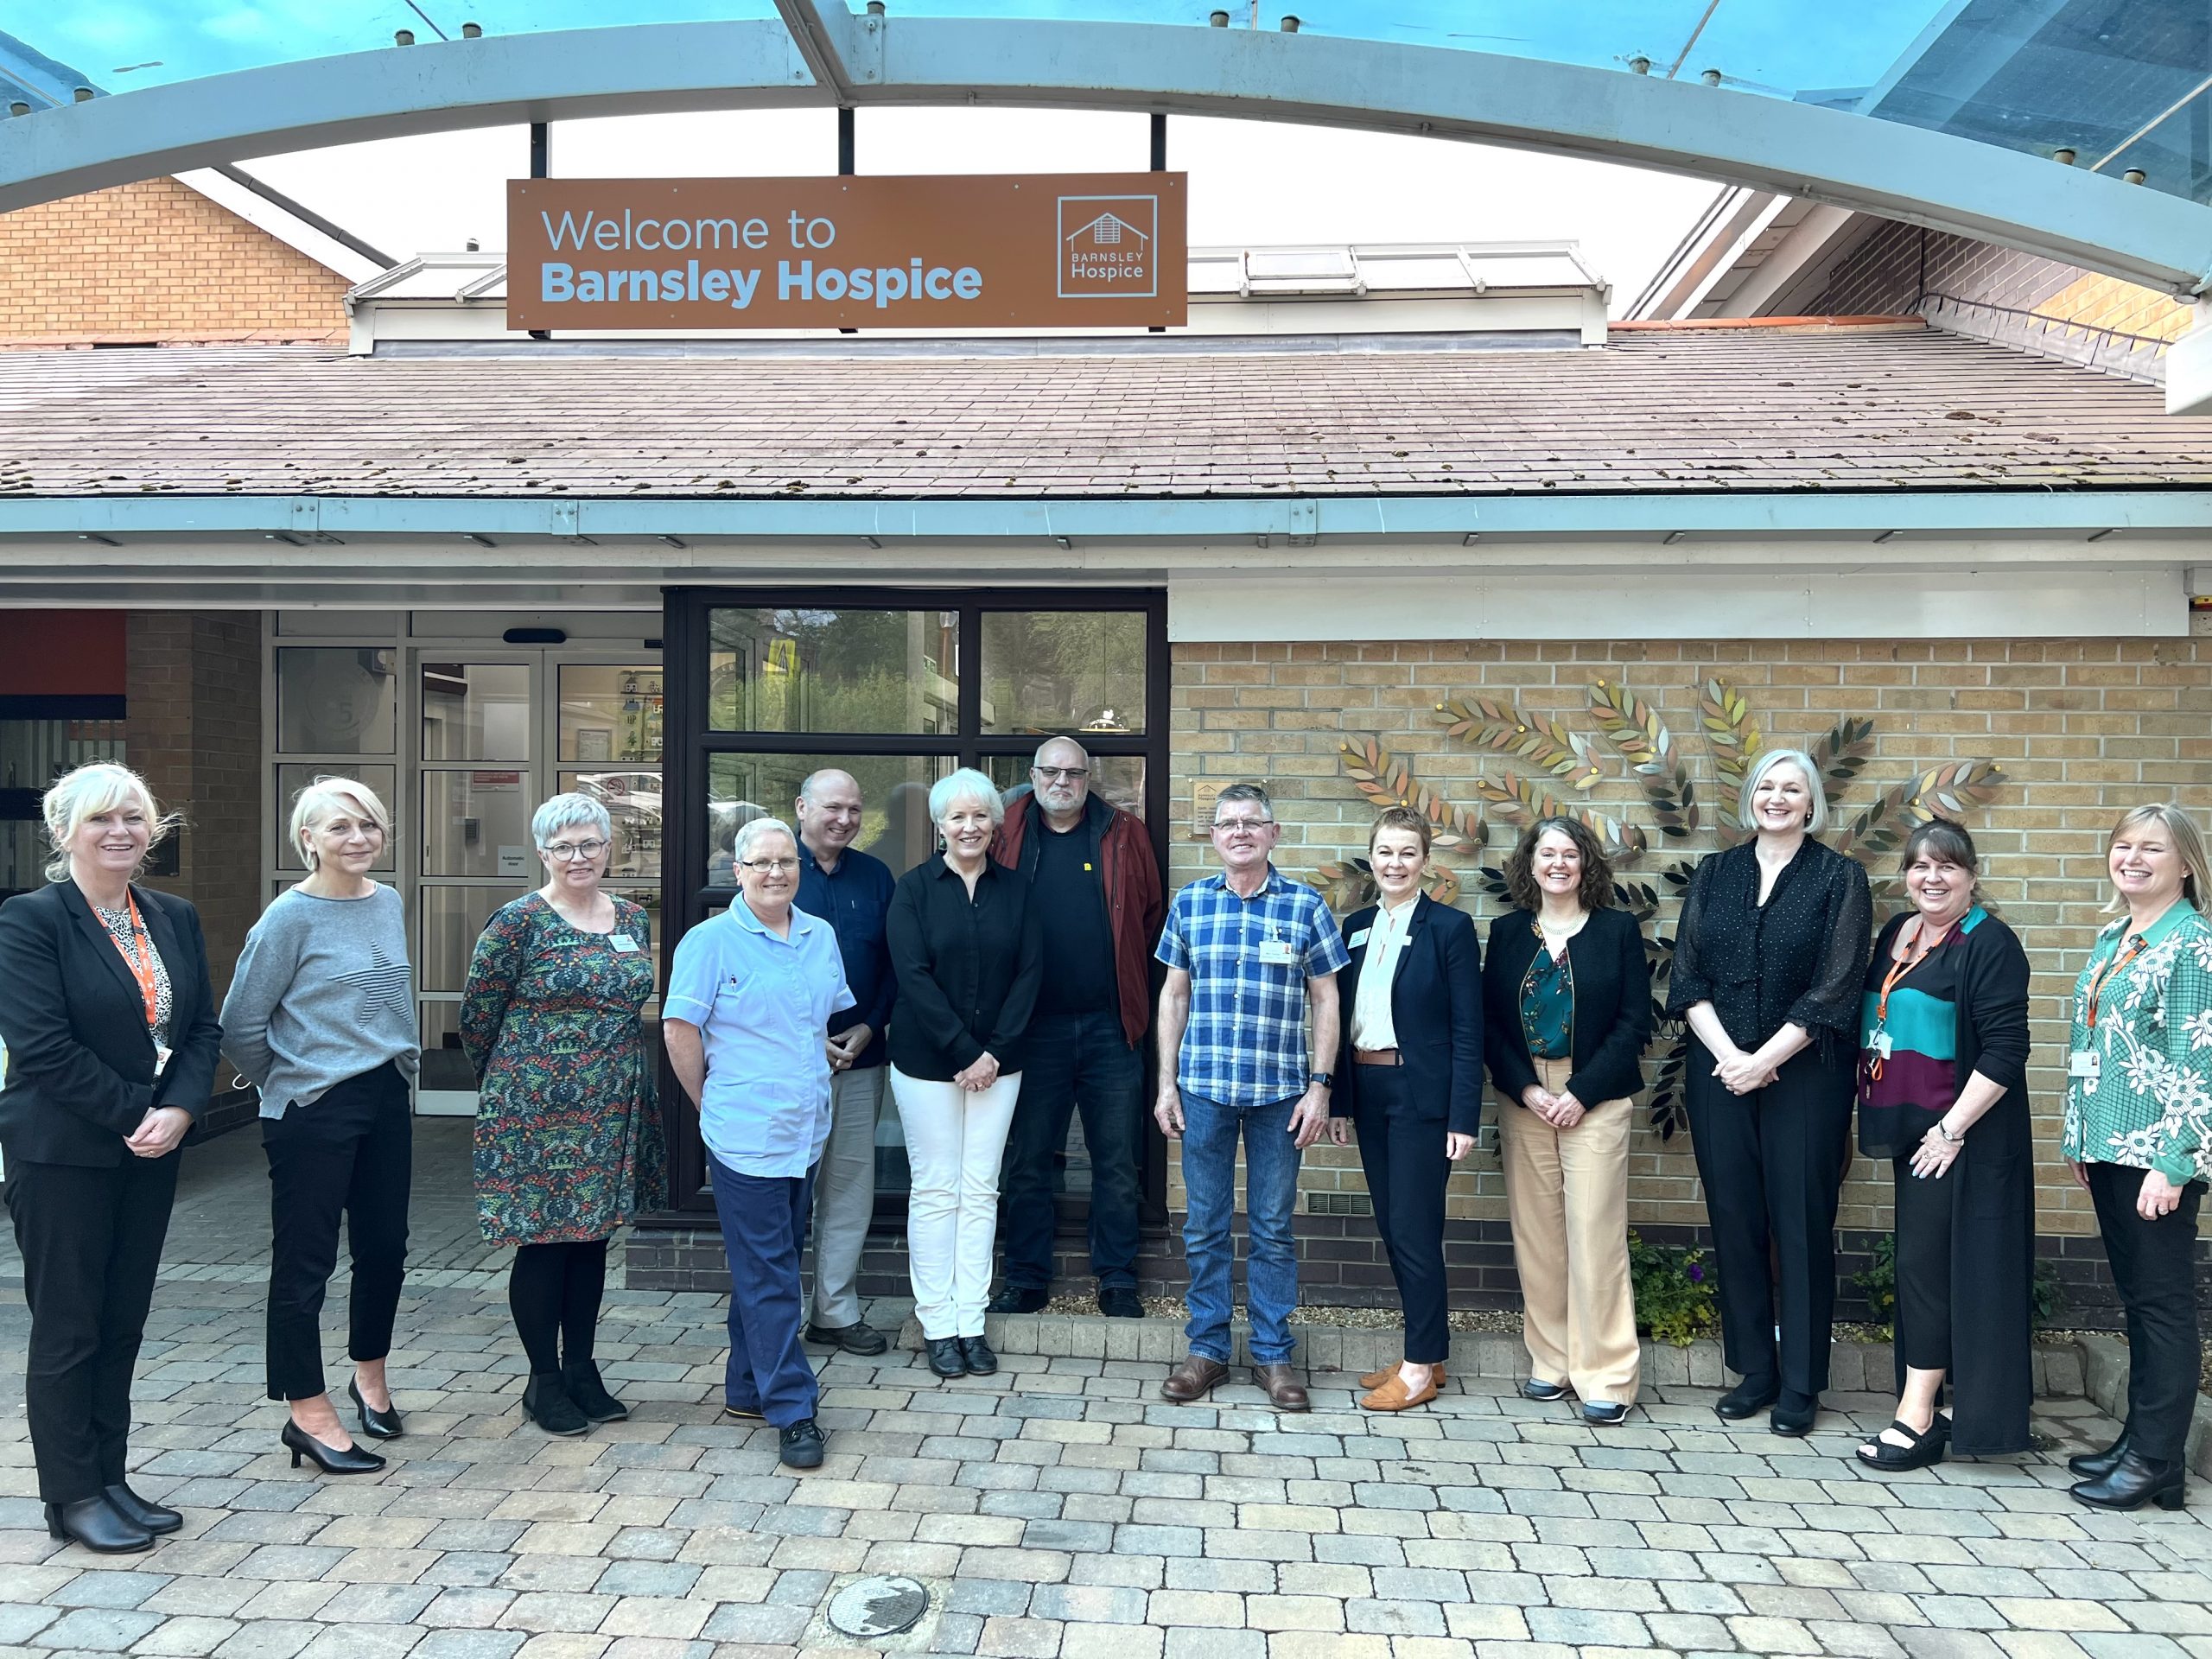 A team photo of staff and supporters smiling outside the front of the hospice. You can see The Legacy tree in the background.